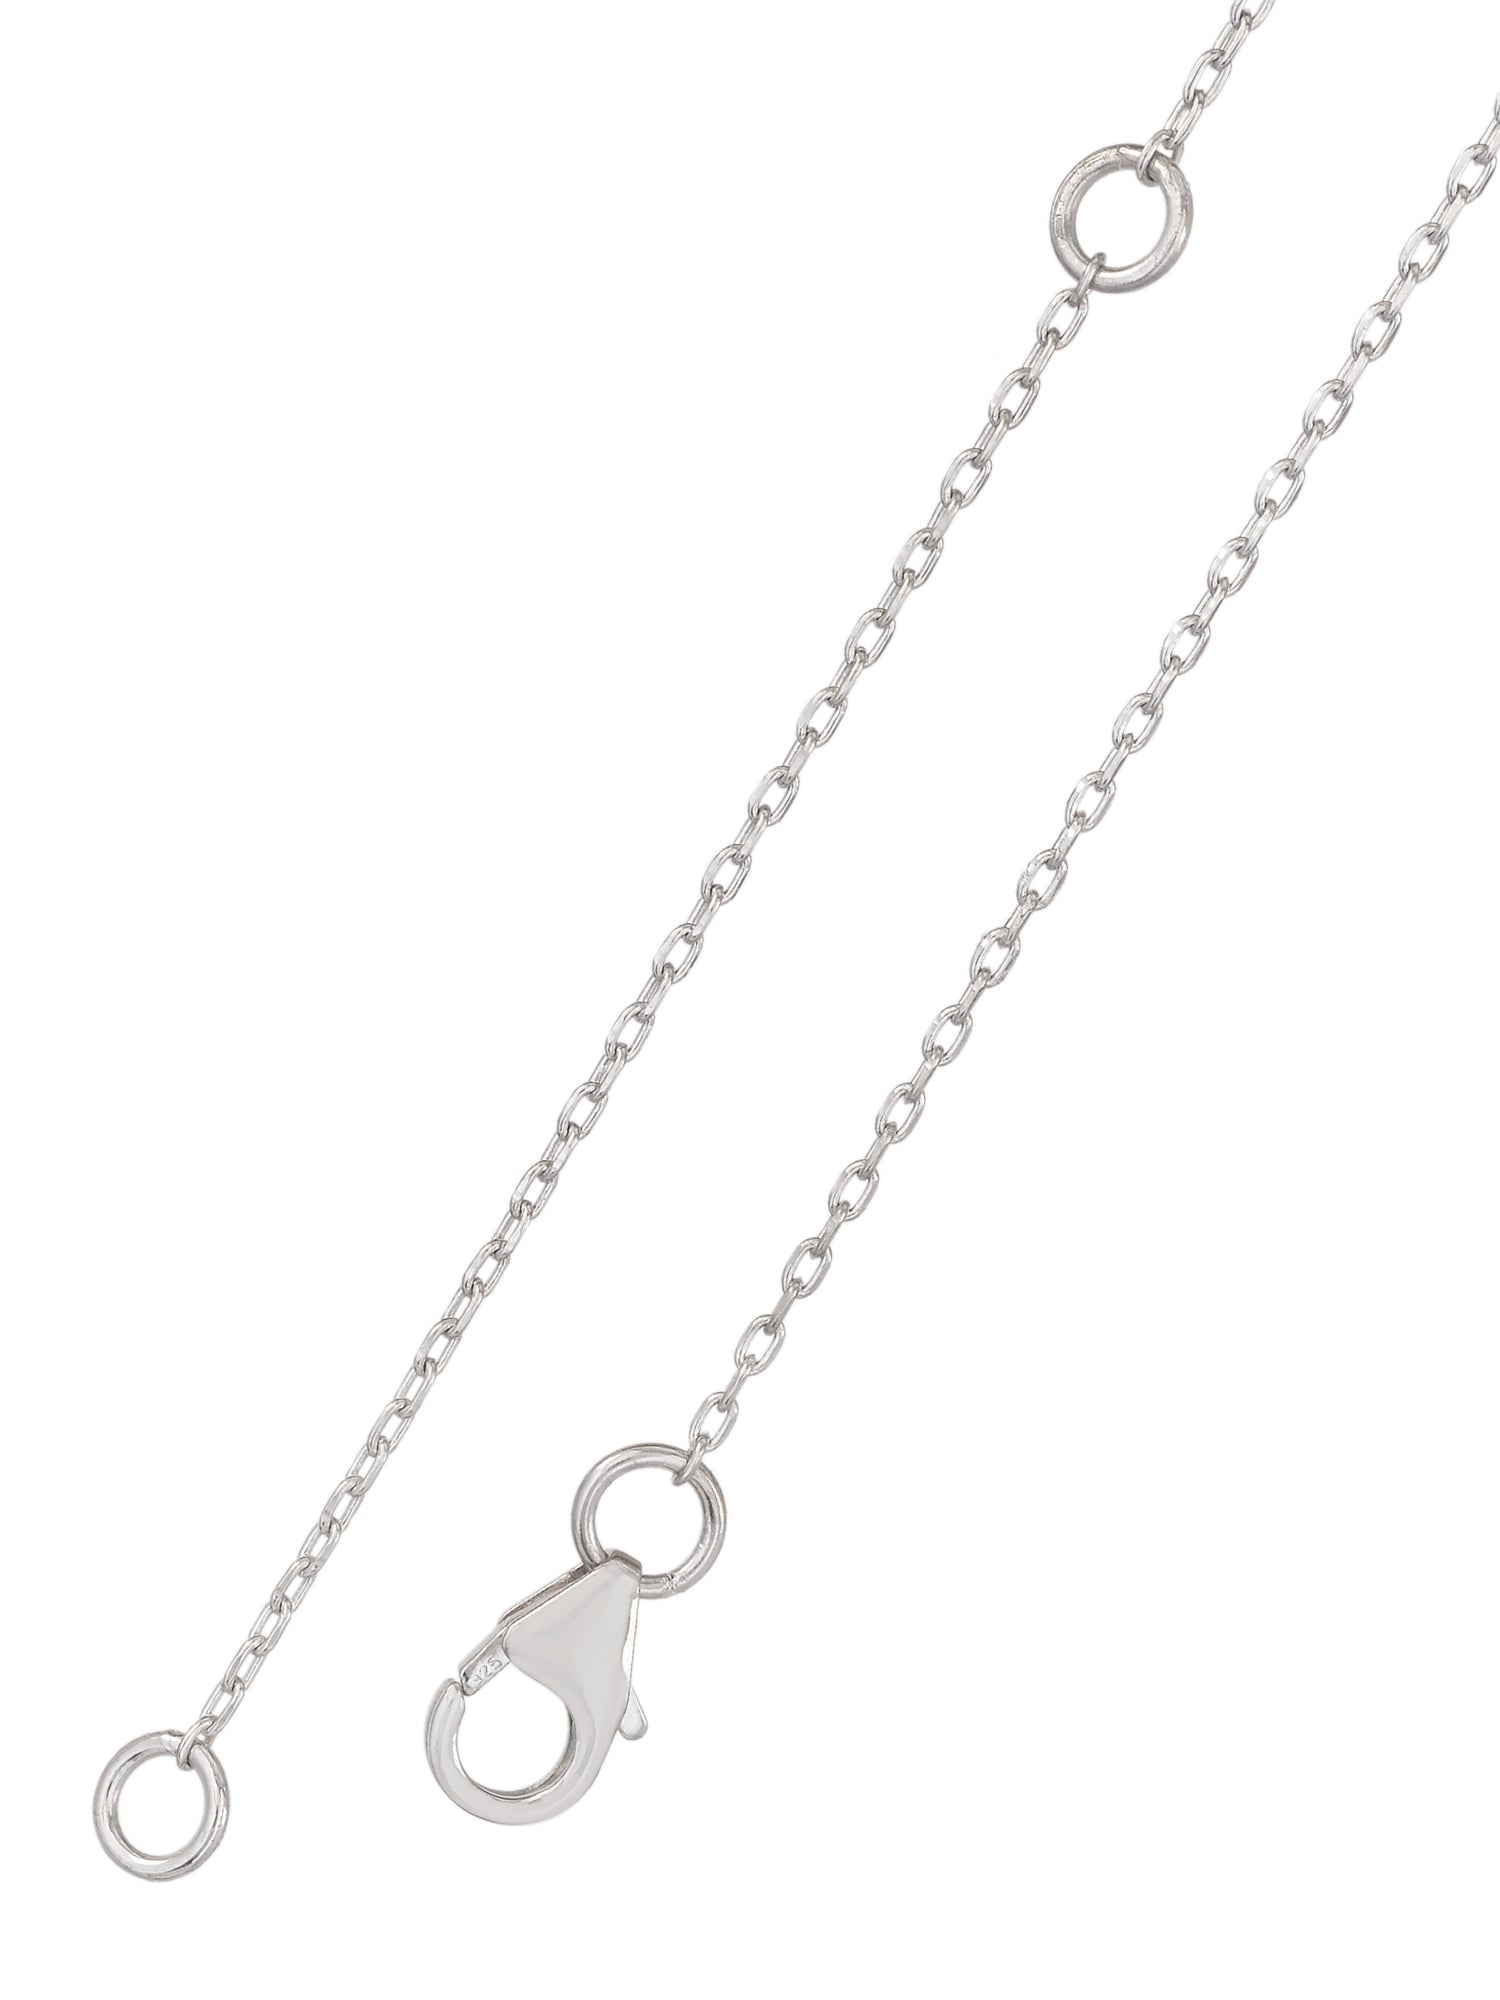 PEARL DROP STERLING SILVER 18 INCHES LARIAT NECKLACE